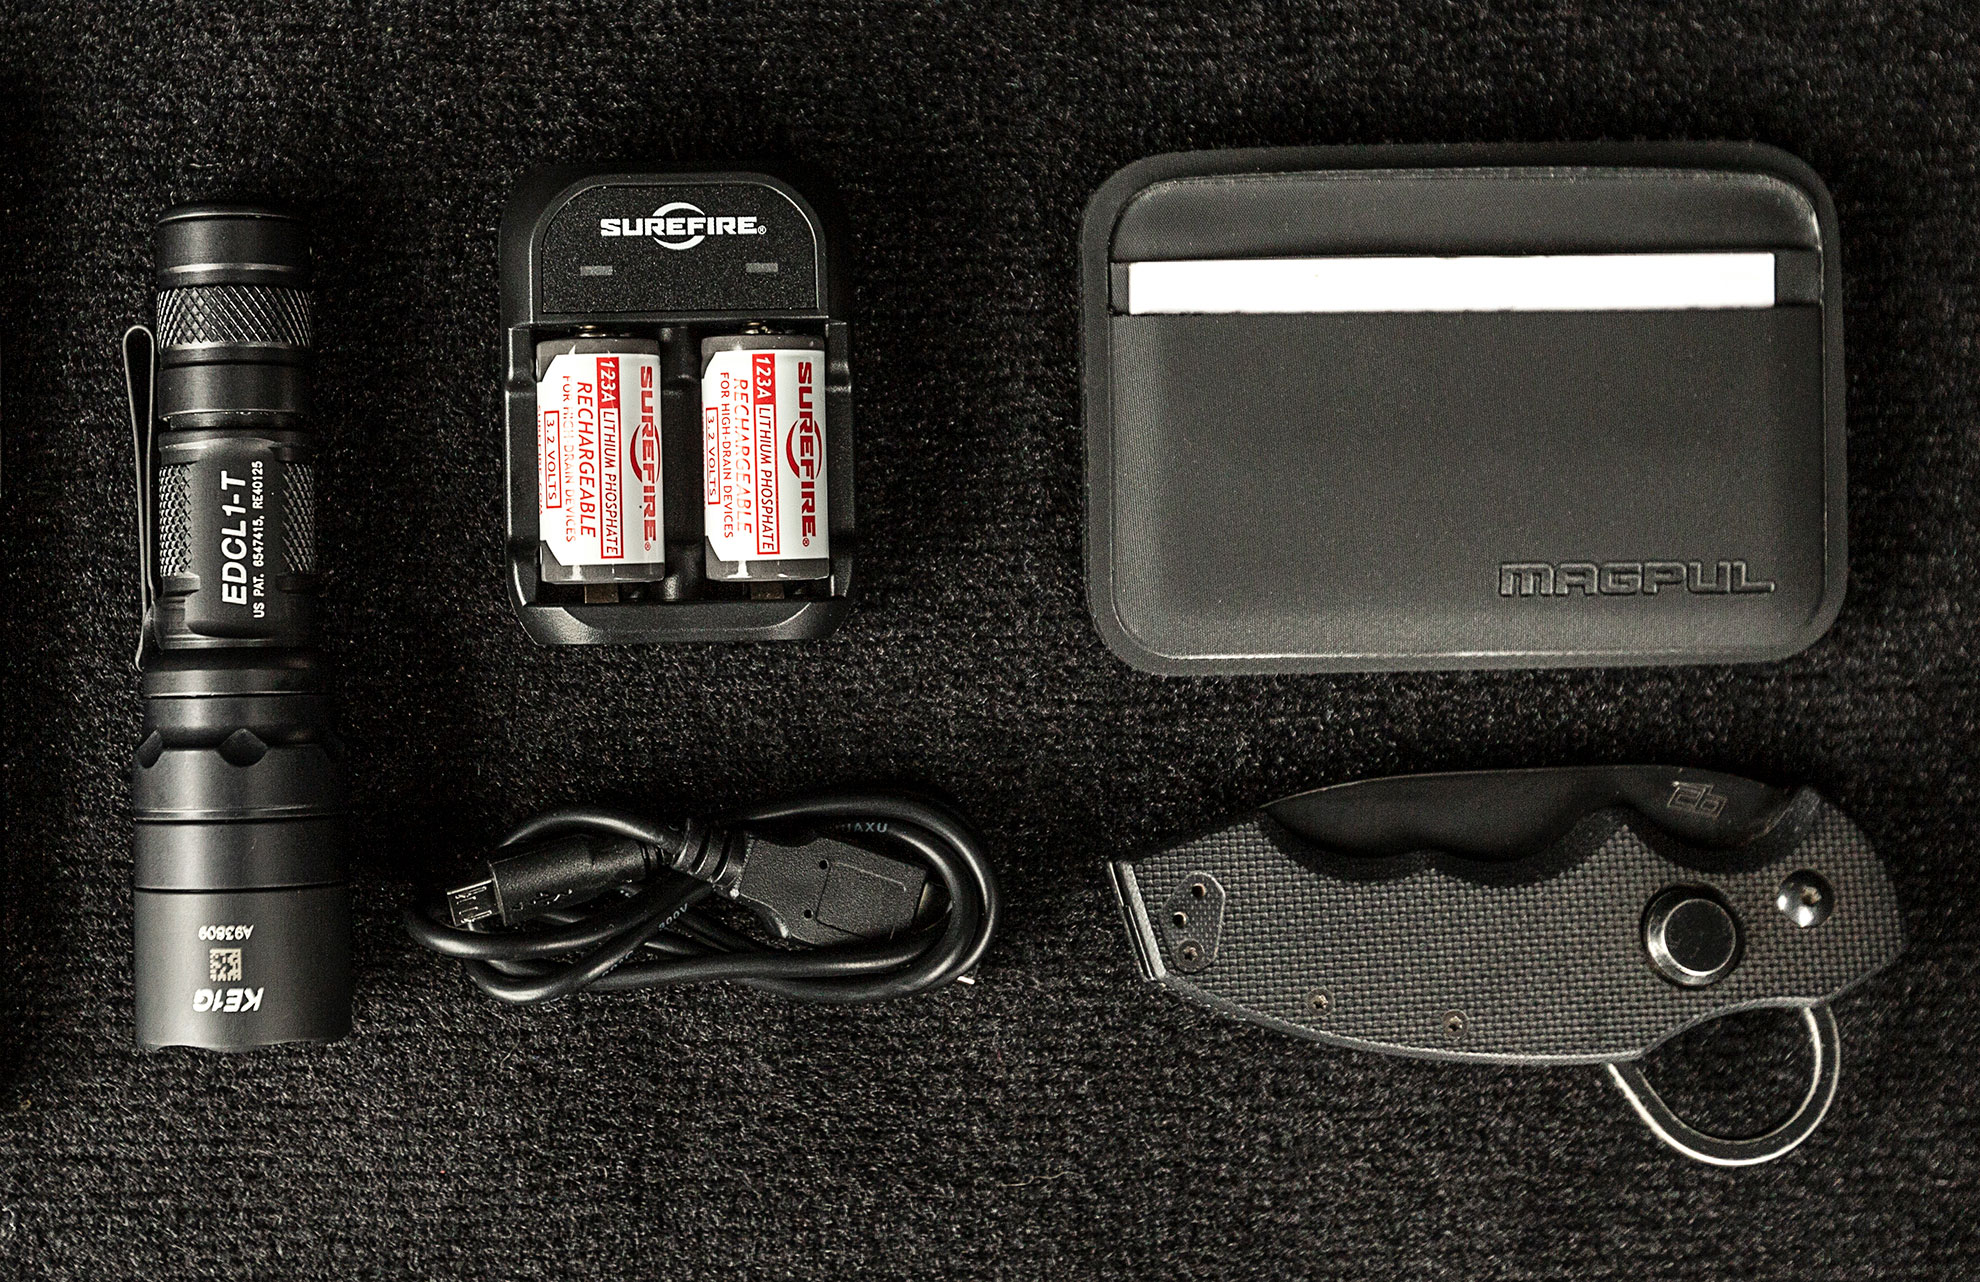 SFLFP batteries and charger pocket dump